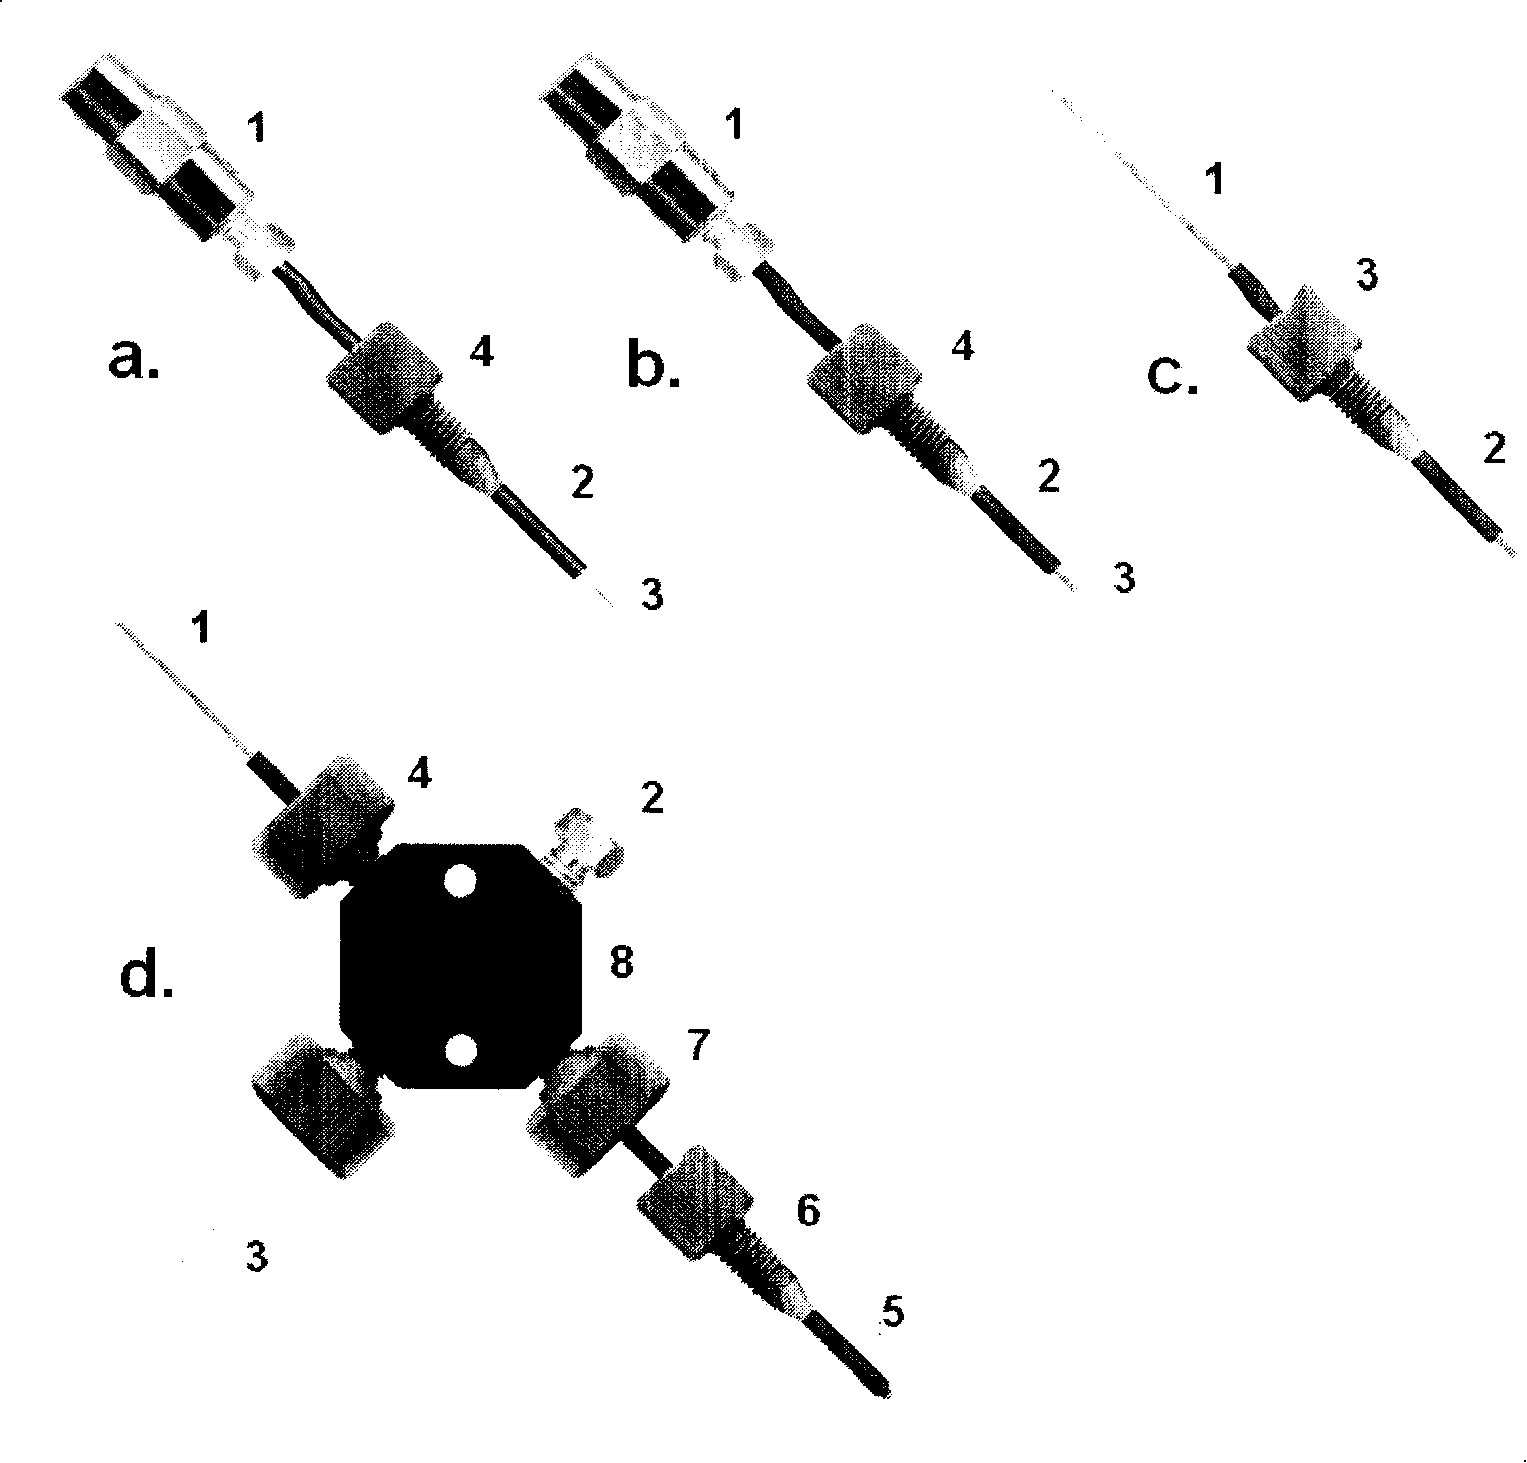 Multicenter electric spraying ion source for micro liquid phase separation system and mass spectrum